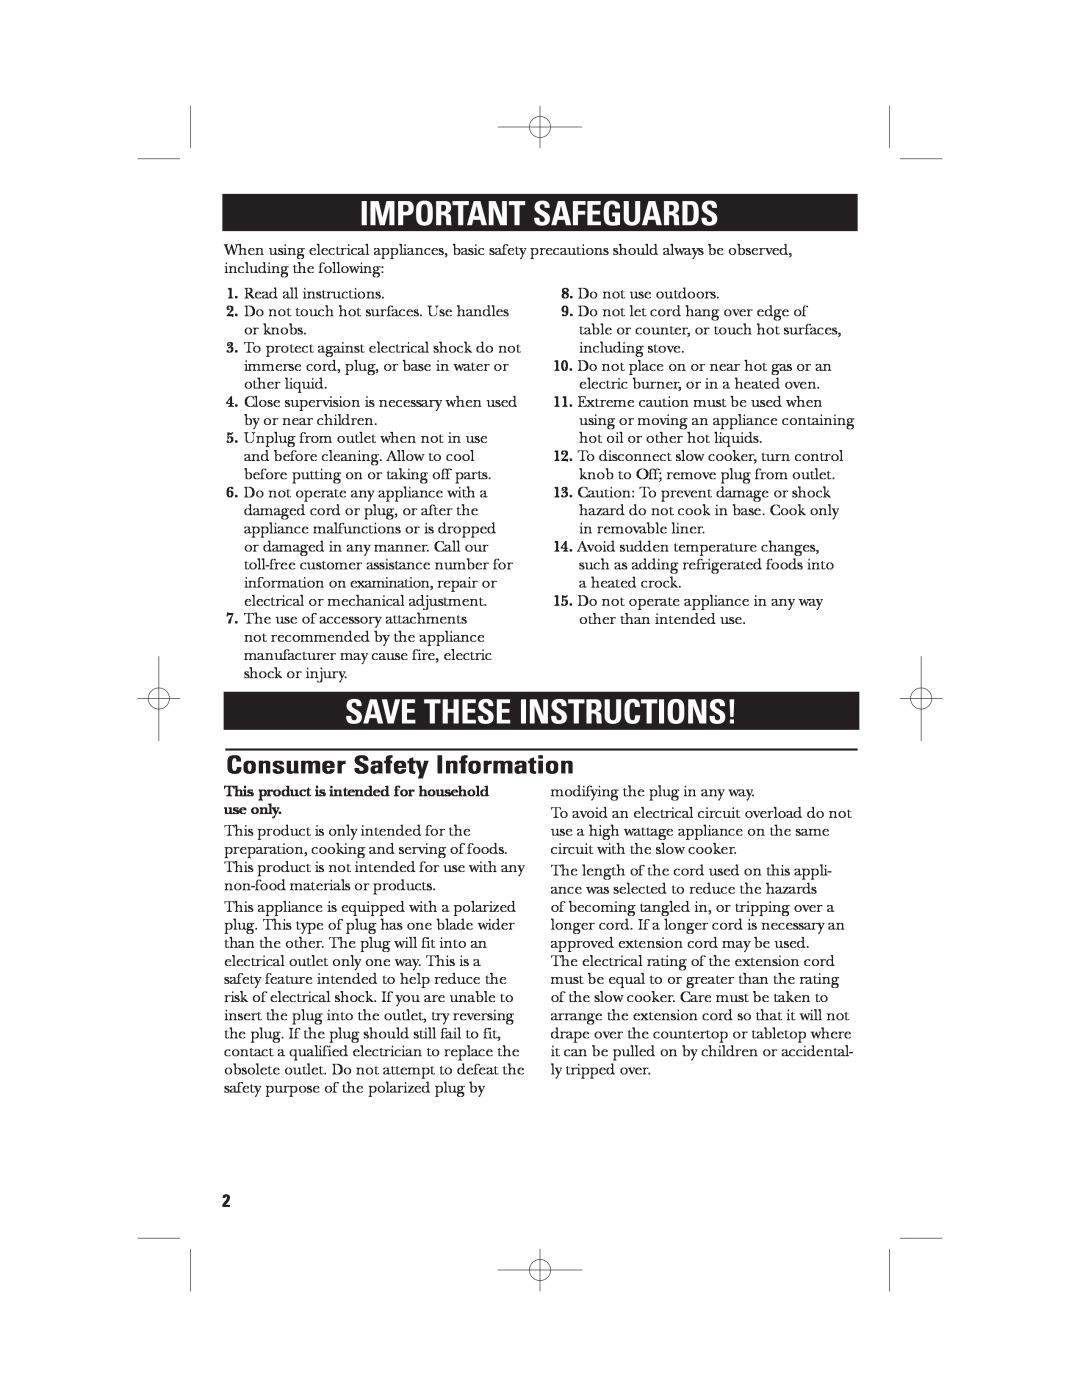 GE 169016 manual Consumer Safety Information, Important Safeguards, Save These Instructions 